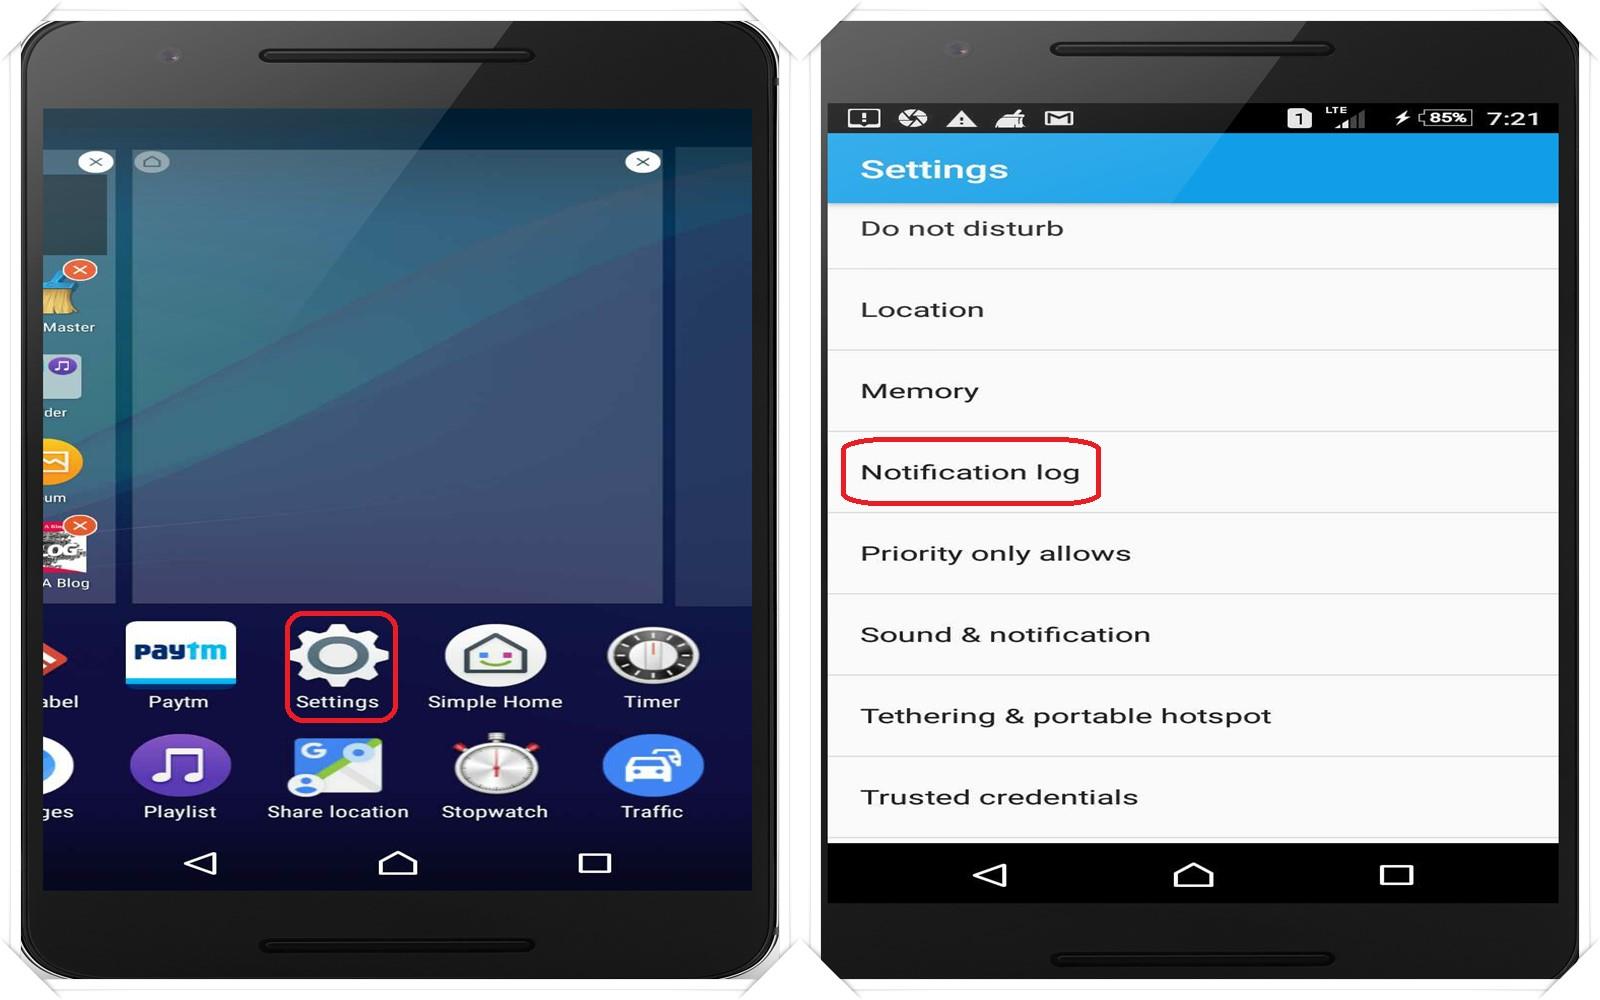 secret features of android operating system enable notification log